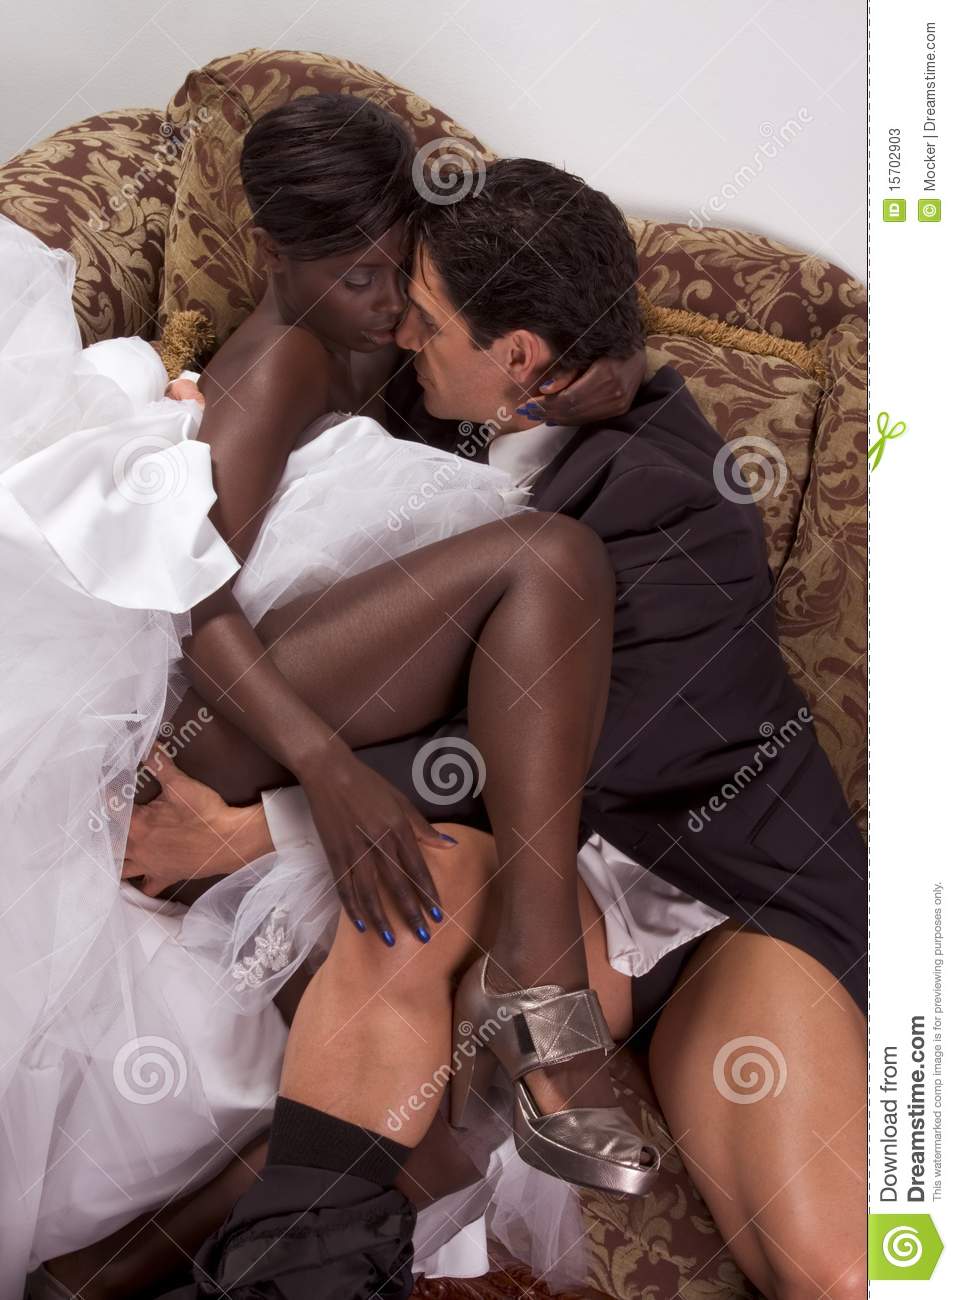 Interracial relationships and sex